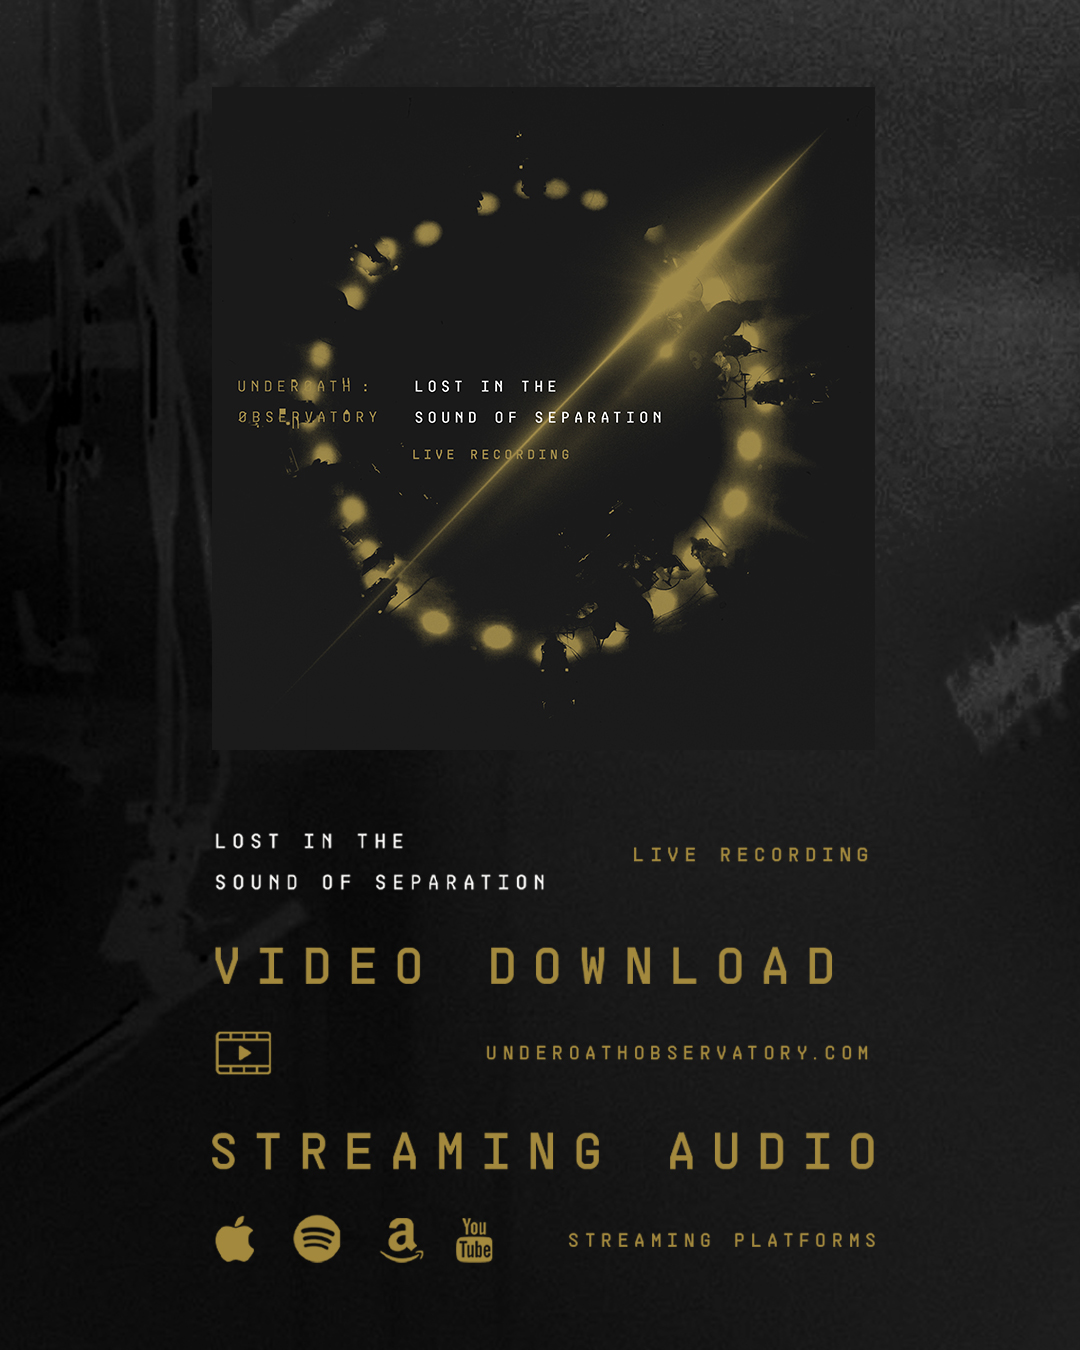 Underoath Releasing Audio + Video From "Lost in the Sound of Separation" Livestream + Vinyl